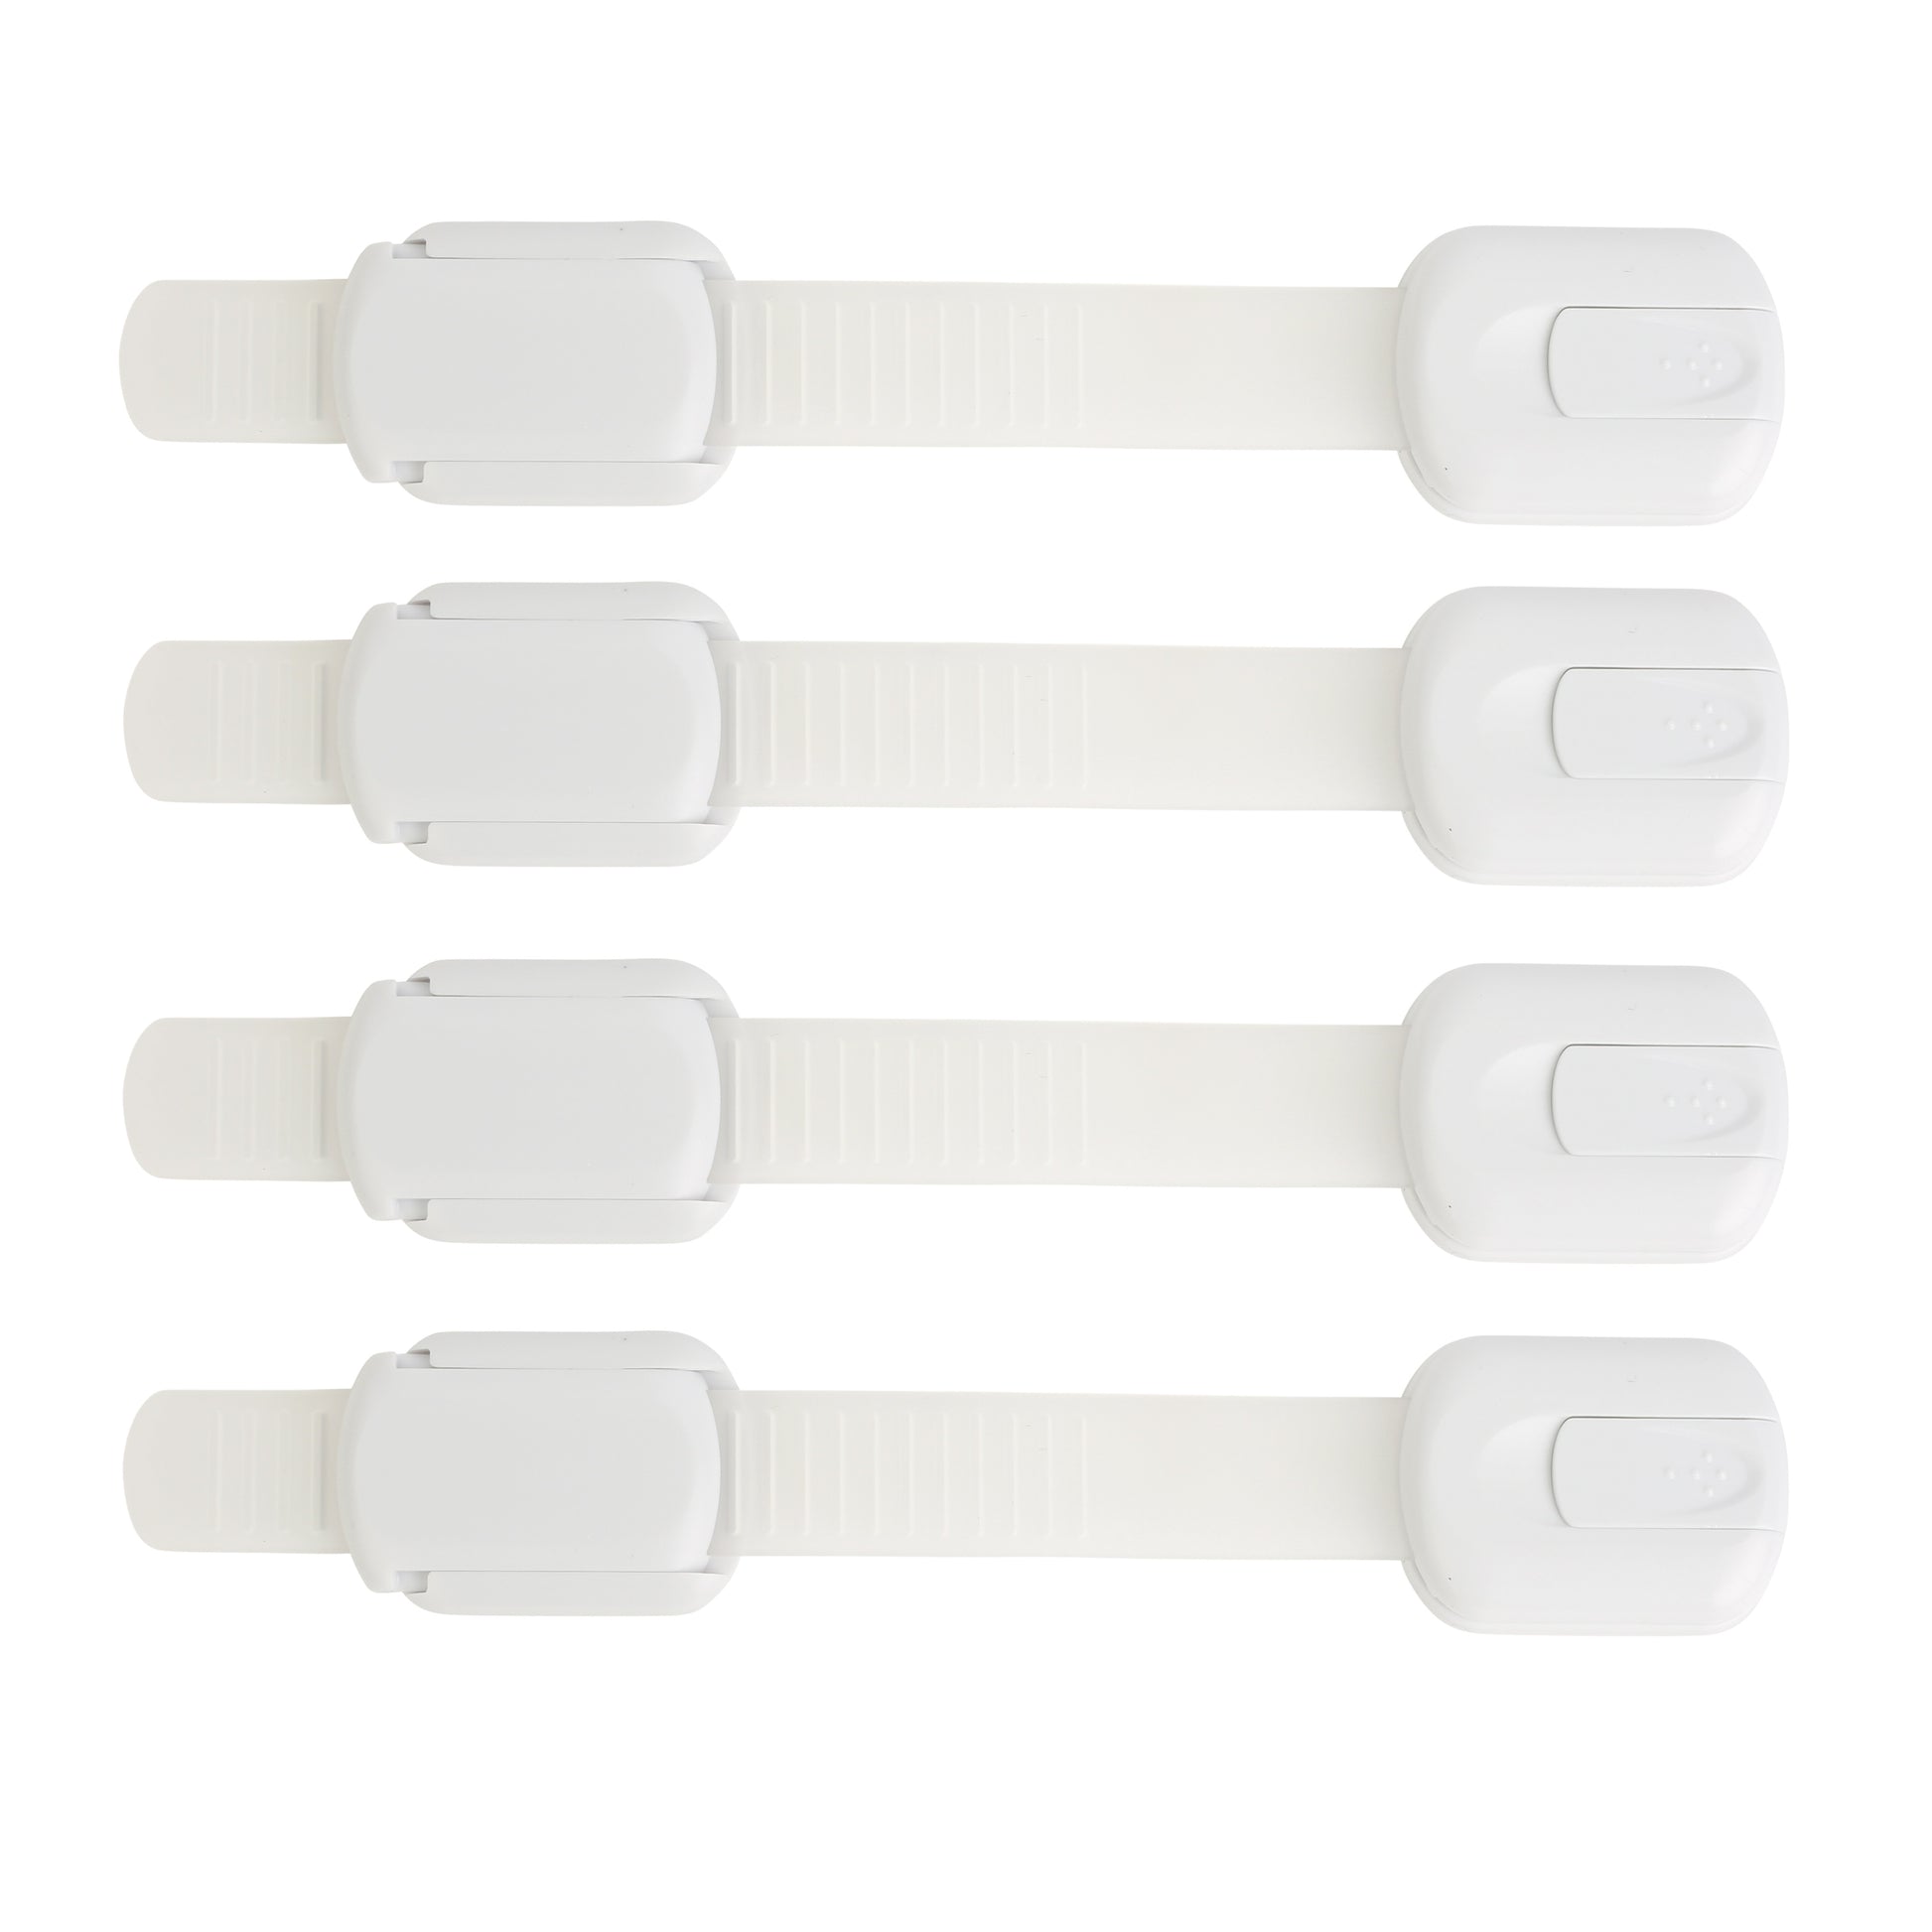 High quality child safety latches baby safety strap locks for